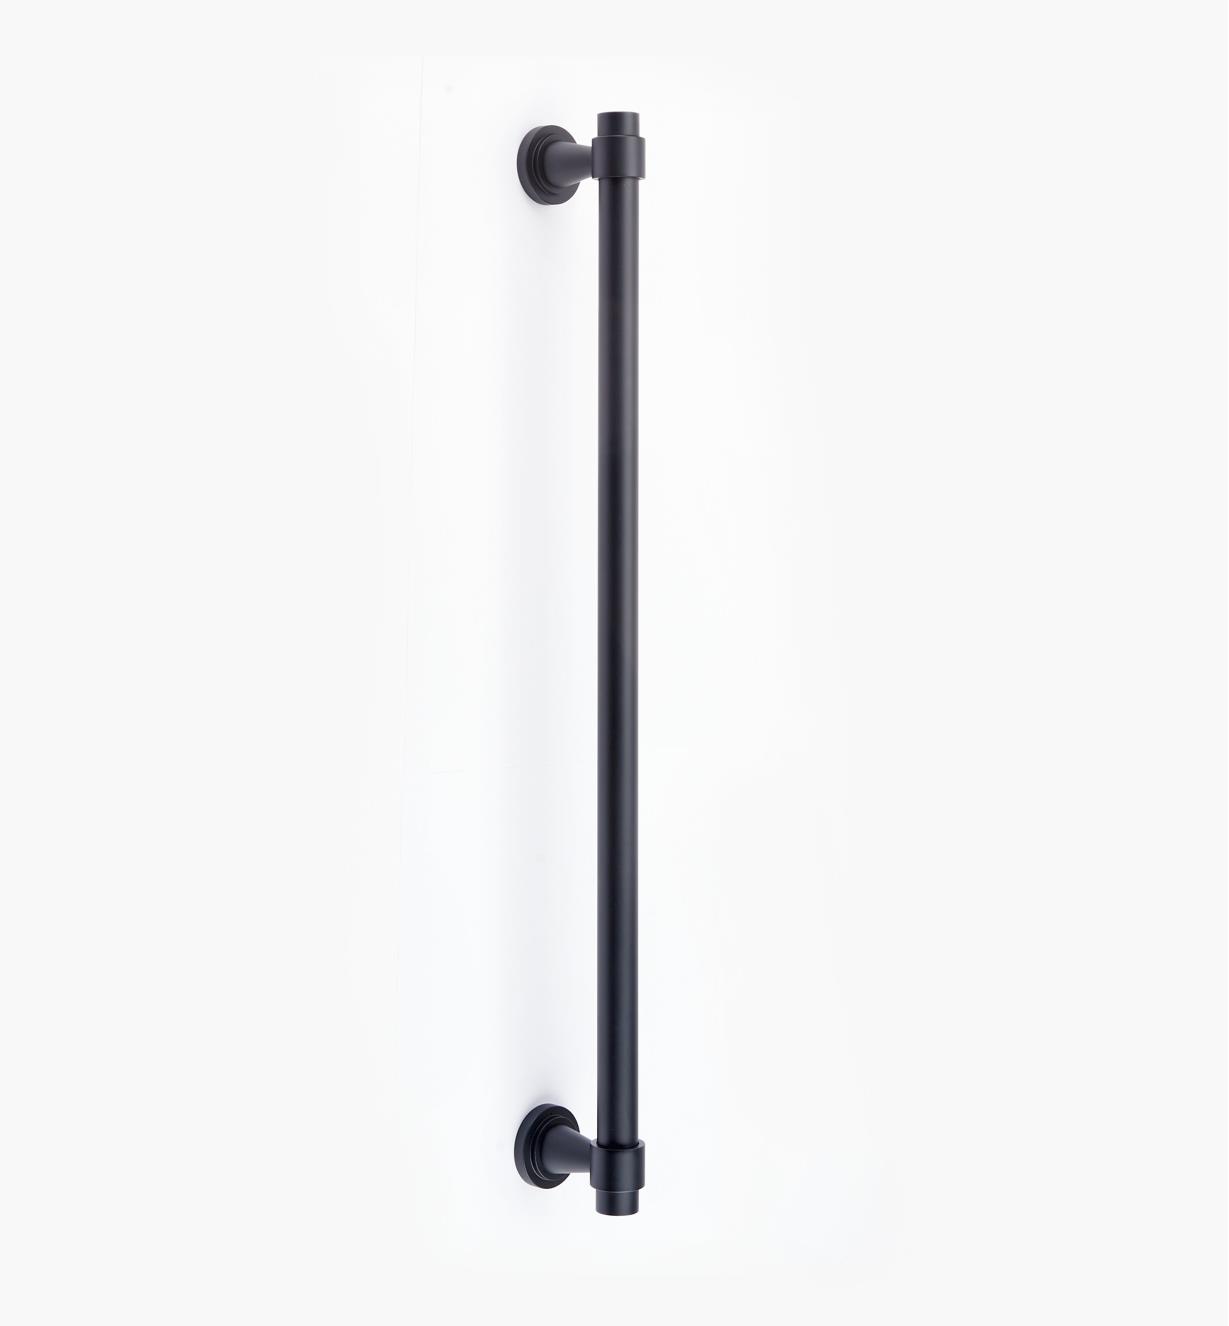 00W0719 - Concerto Appliance Handles - 18" (457mm) Oil-Rubbed Bronze Handle